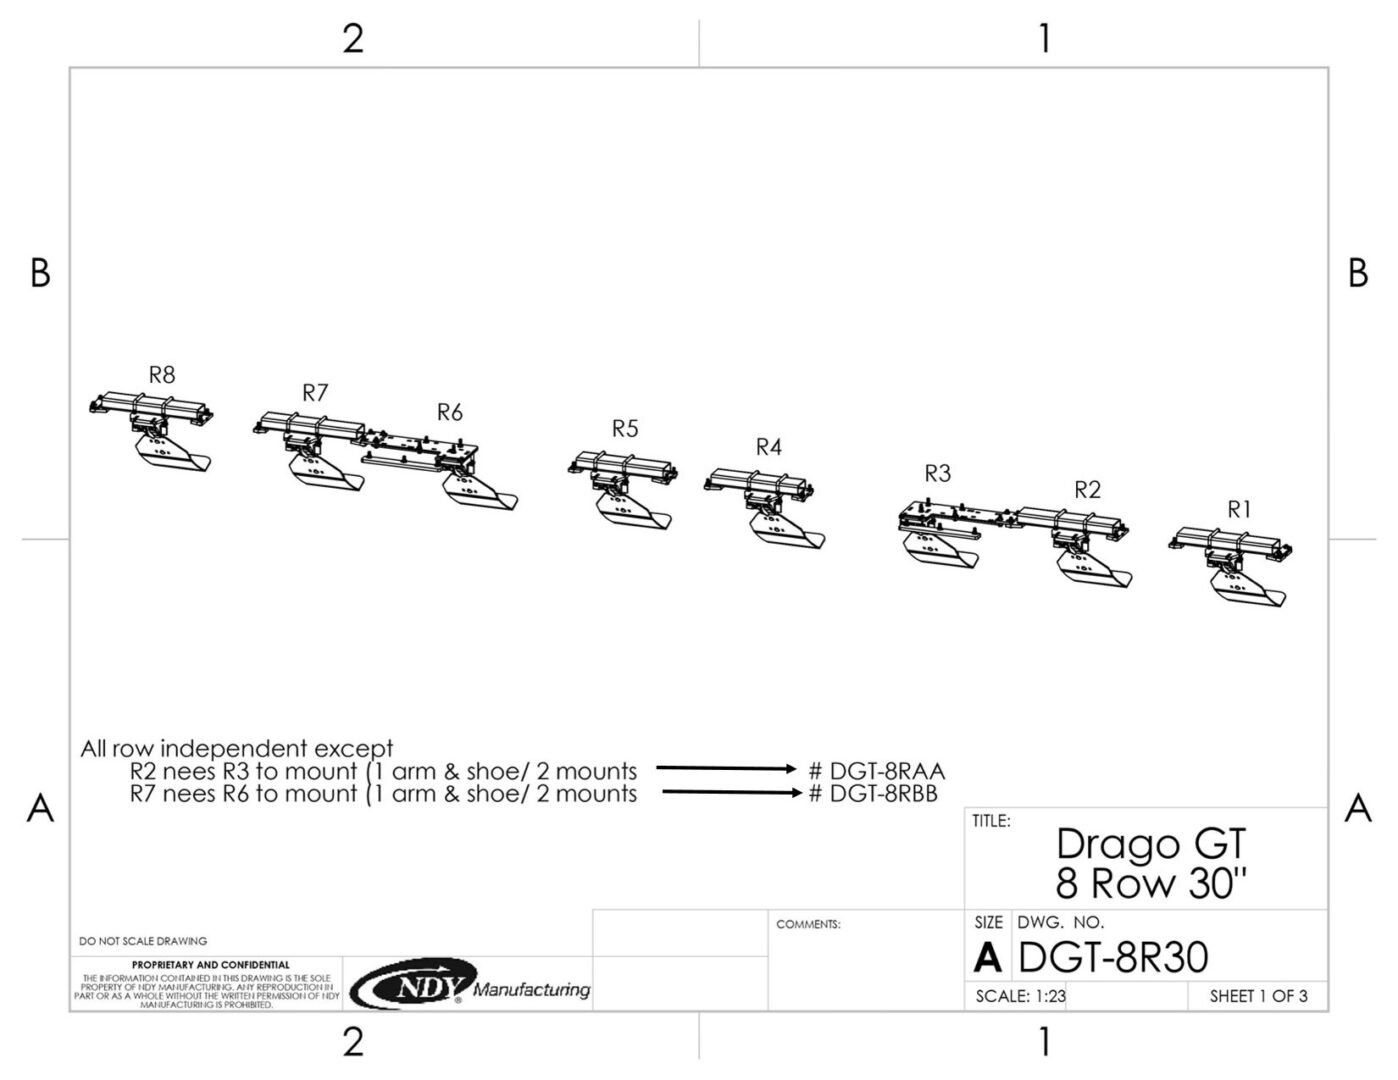 A diagram showing the different parts of a Stalk Stomper for Drago GT Series 8 Row Corn Head.